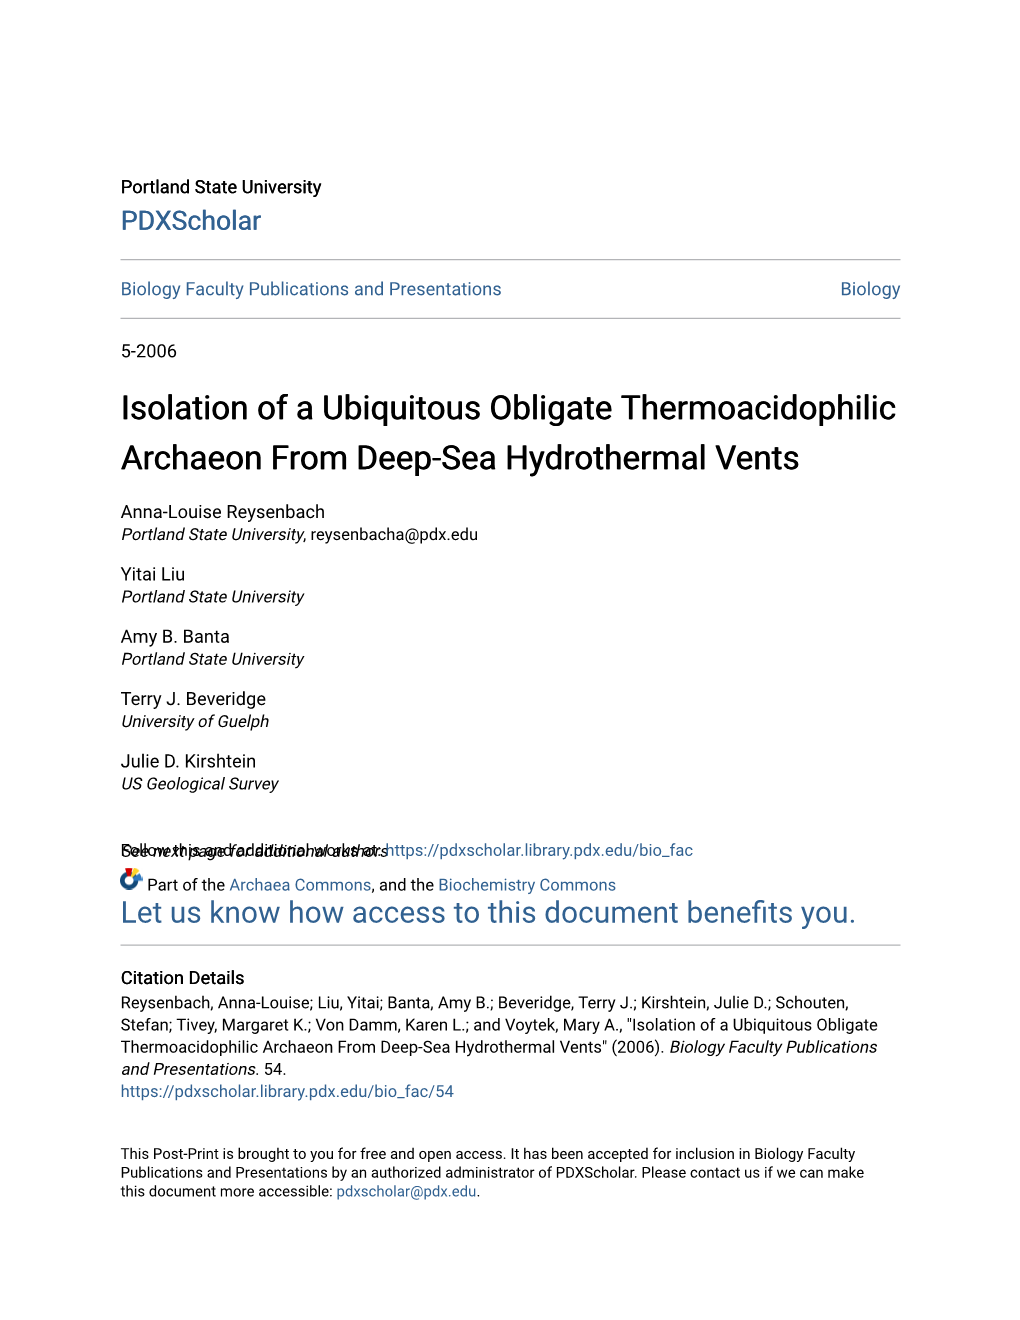 Isolation of a Ubiquitous Obligate Thermoacidophilic Archaeon from Deep-Sea Hydrothermal Vents